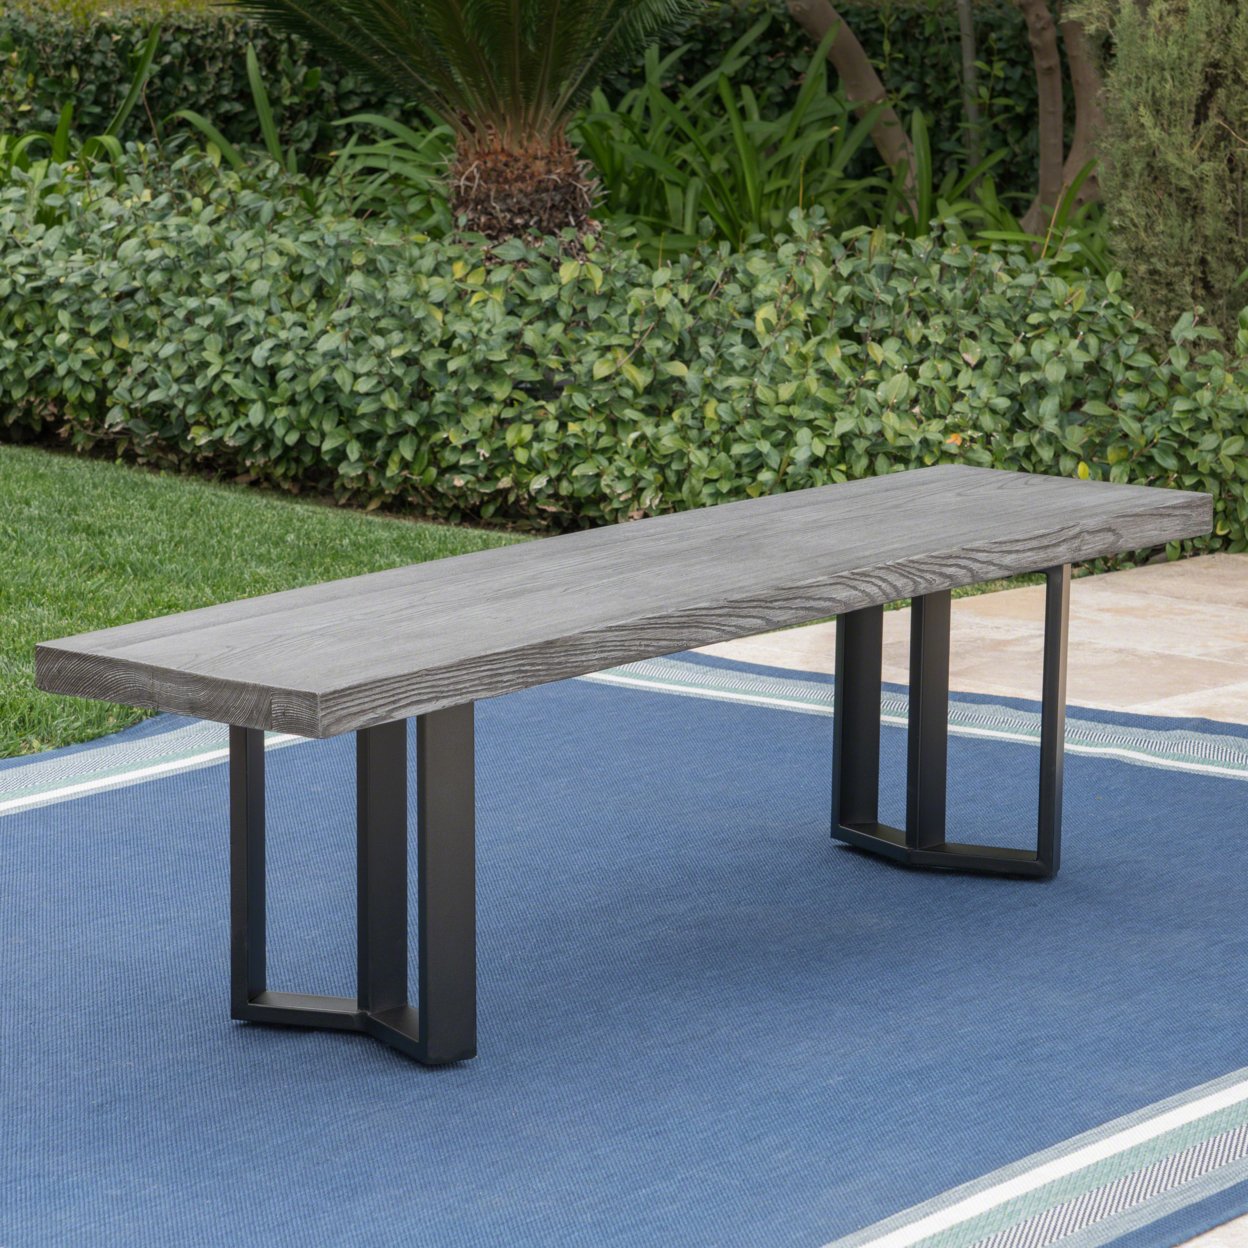 Santa Rosa Outdoor Finish Light Weight Concrete Dining Bench - Textured Brown